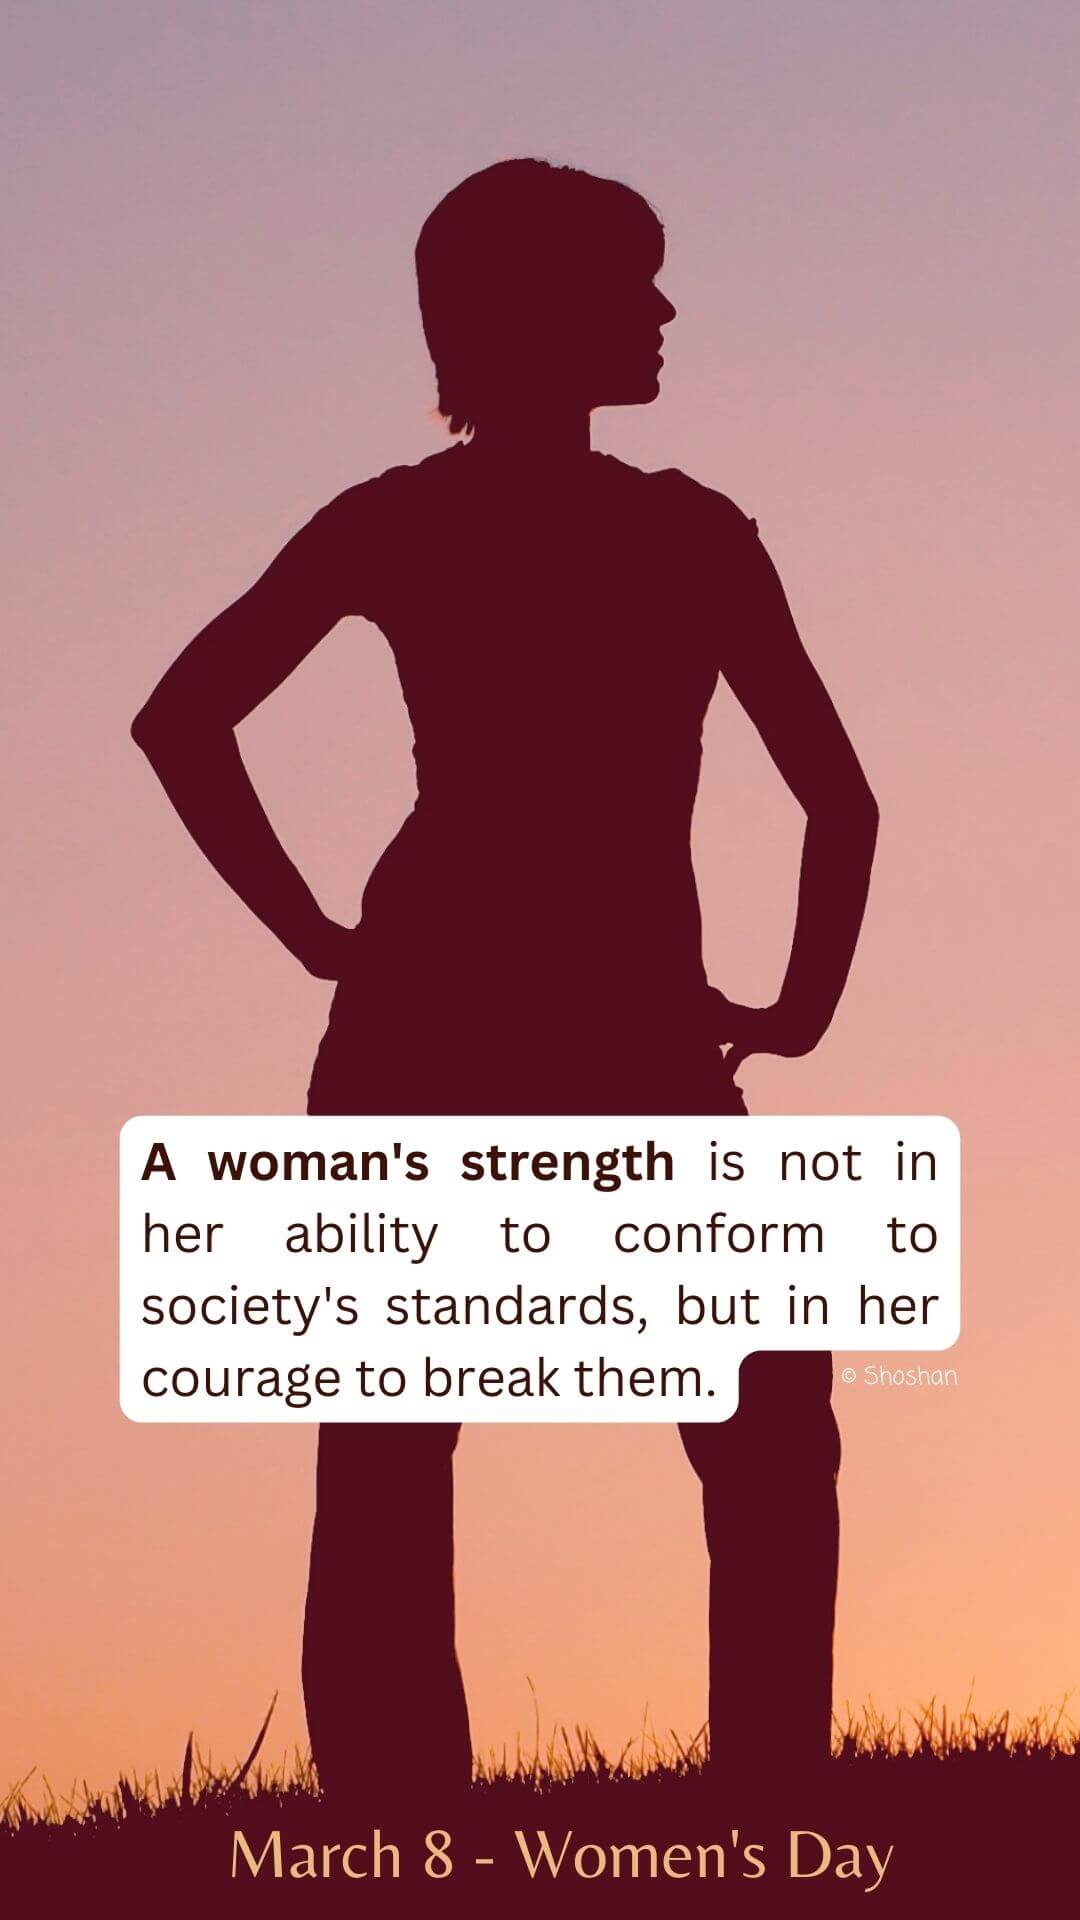 A woman's strength is not in her ability to conform to society's standards, but in her courage to break them.